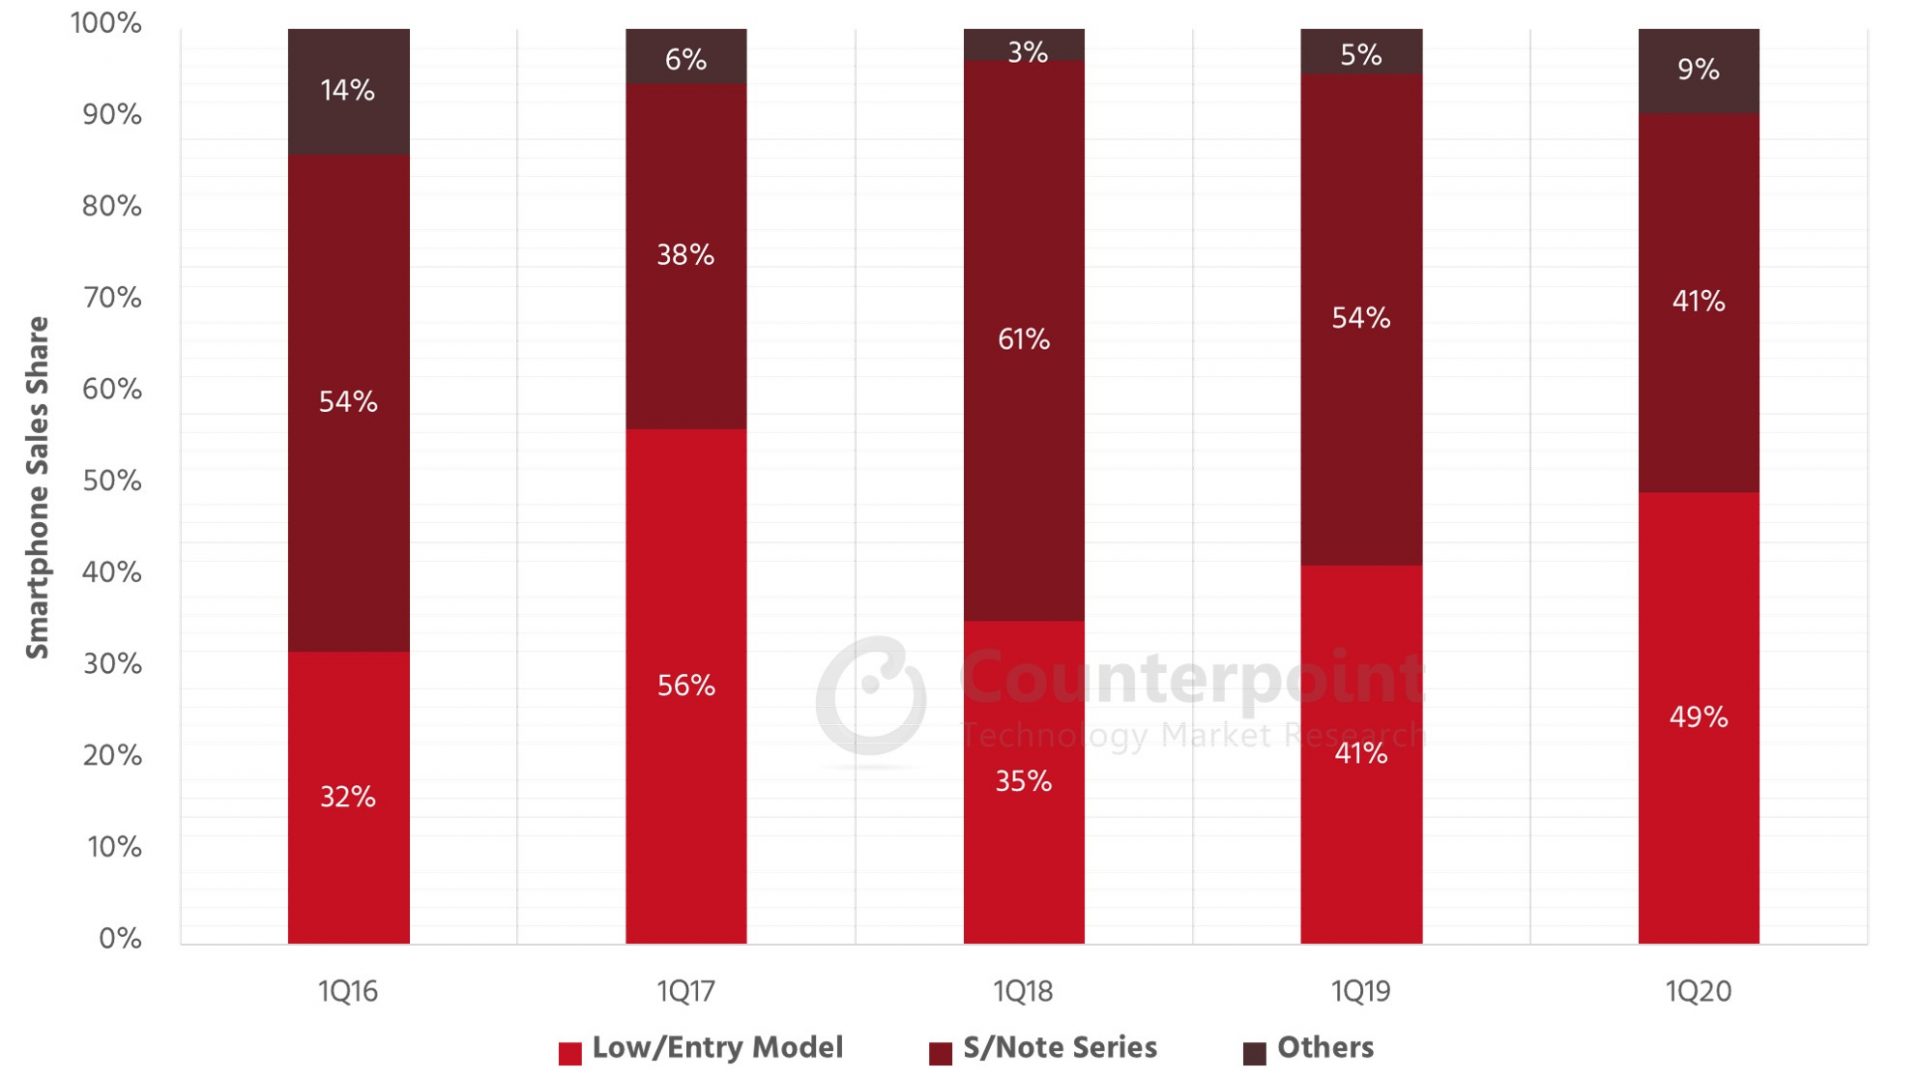 Counterpoint Samsung smartphone sales share by product group, Korea